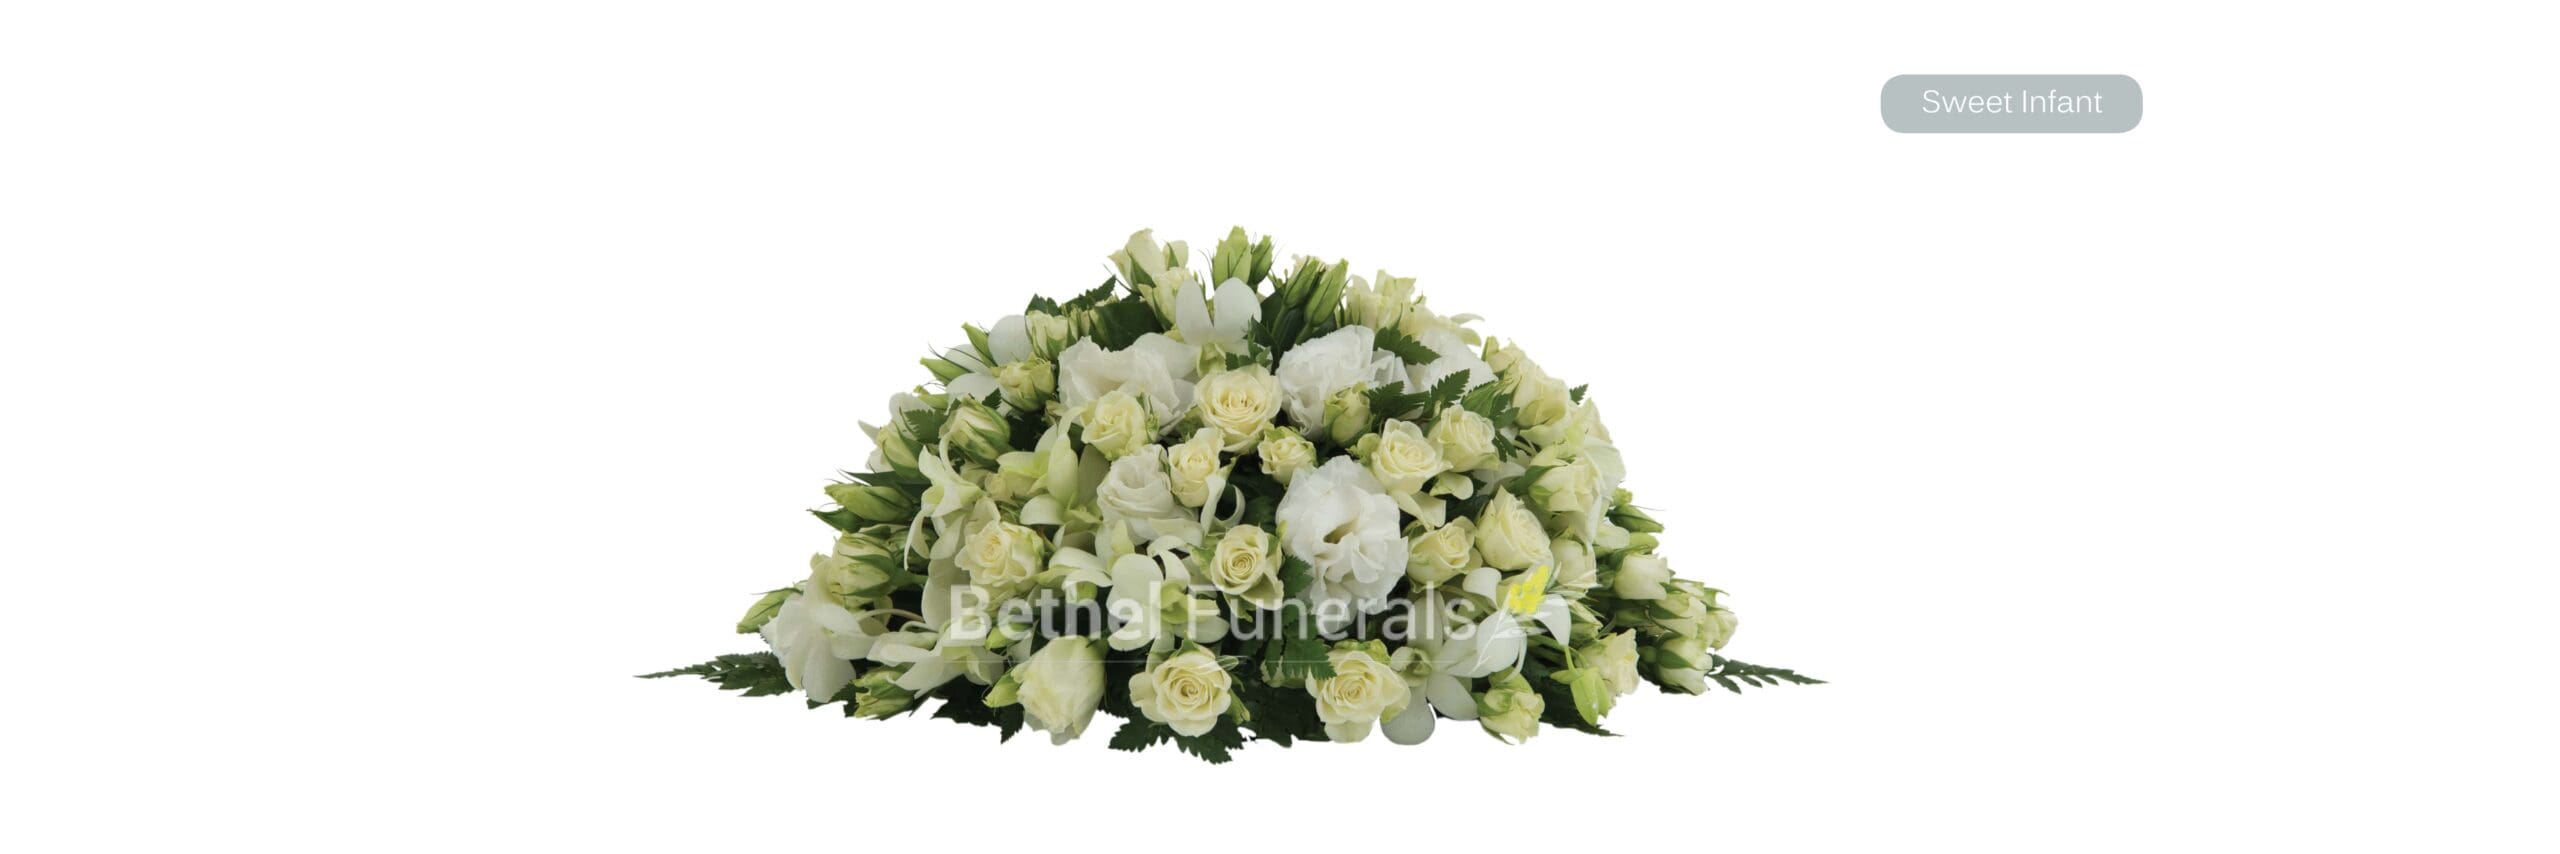 Sweet Infant funeral flowers